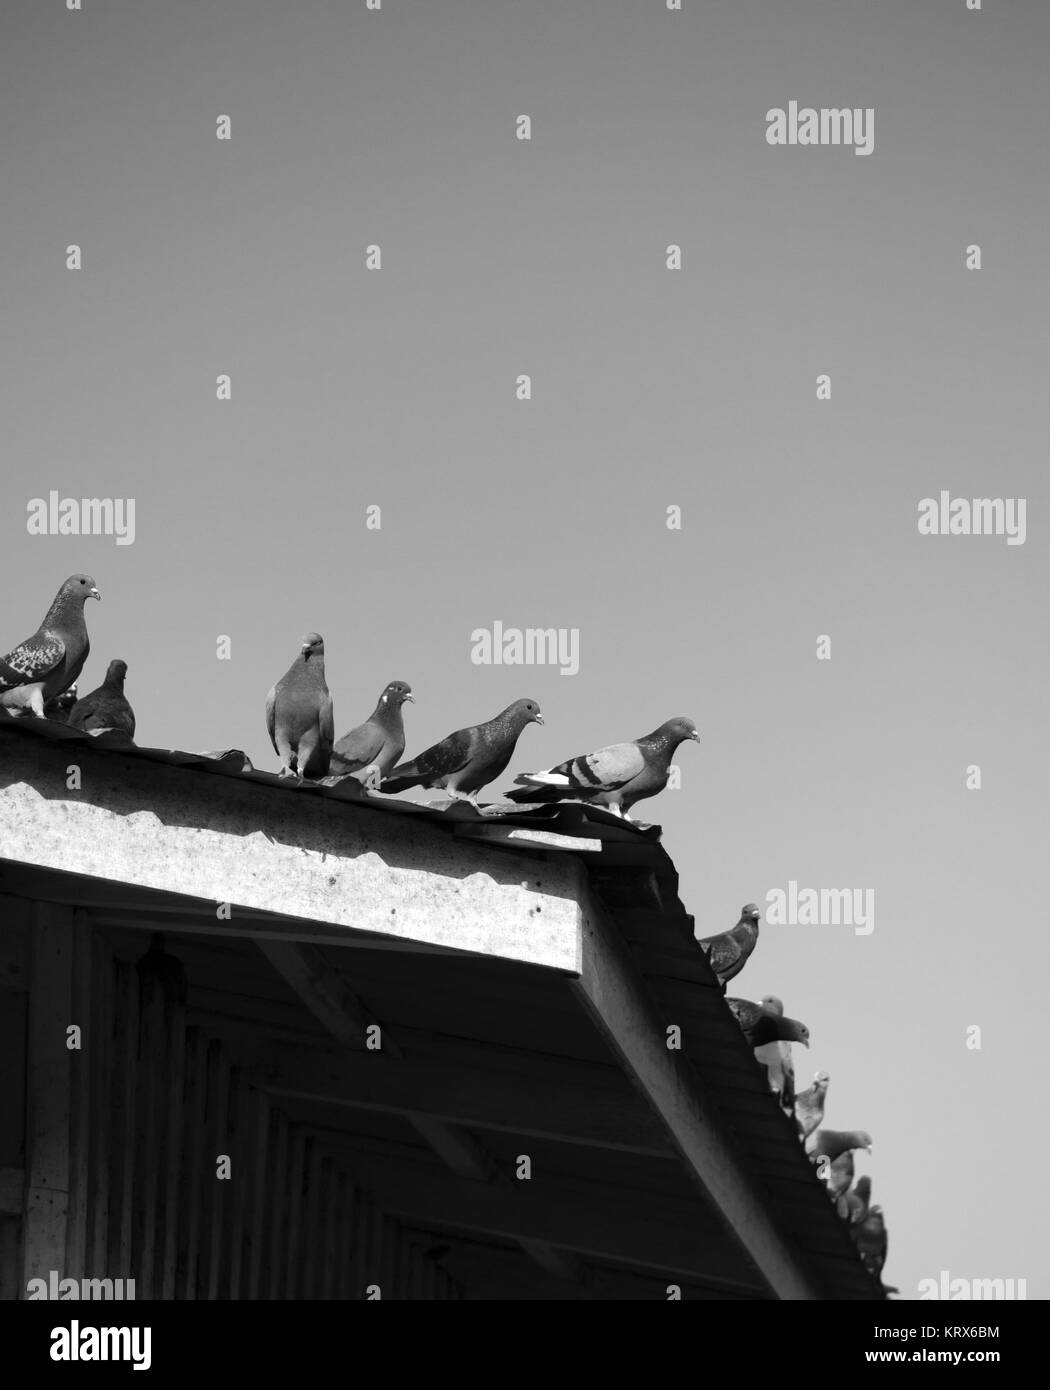 PIGEONS ON THE ROOF Stock Photo